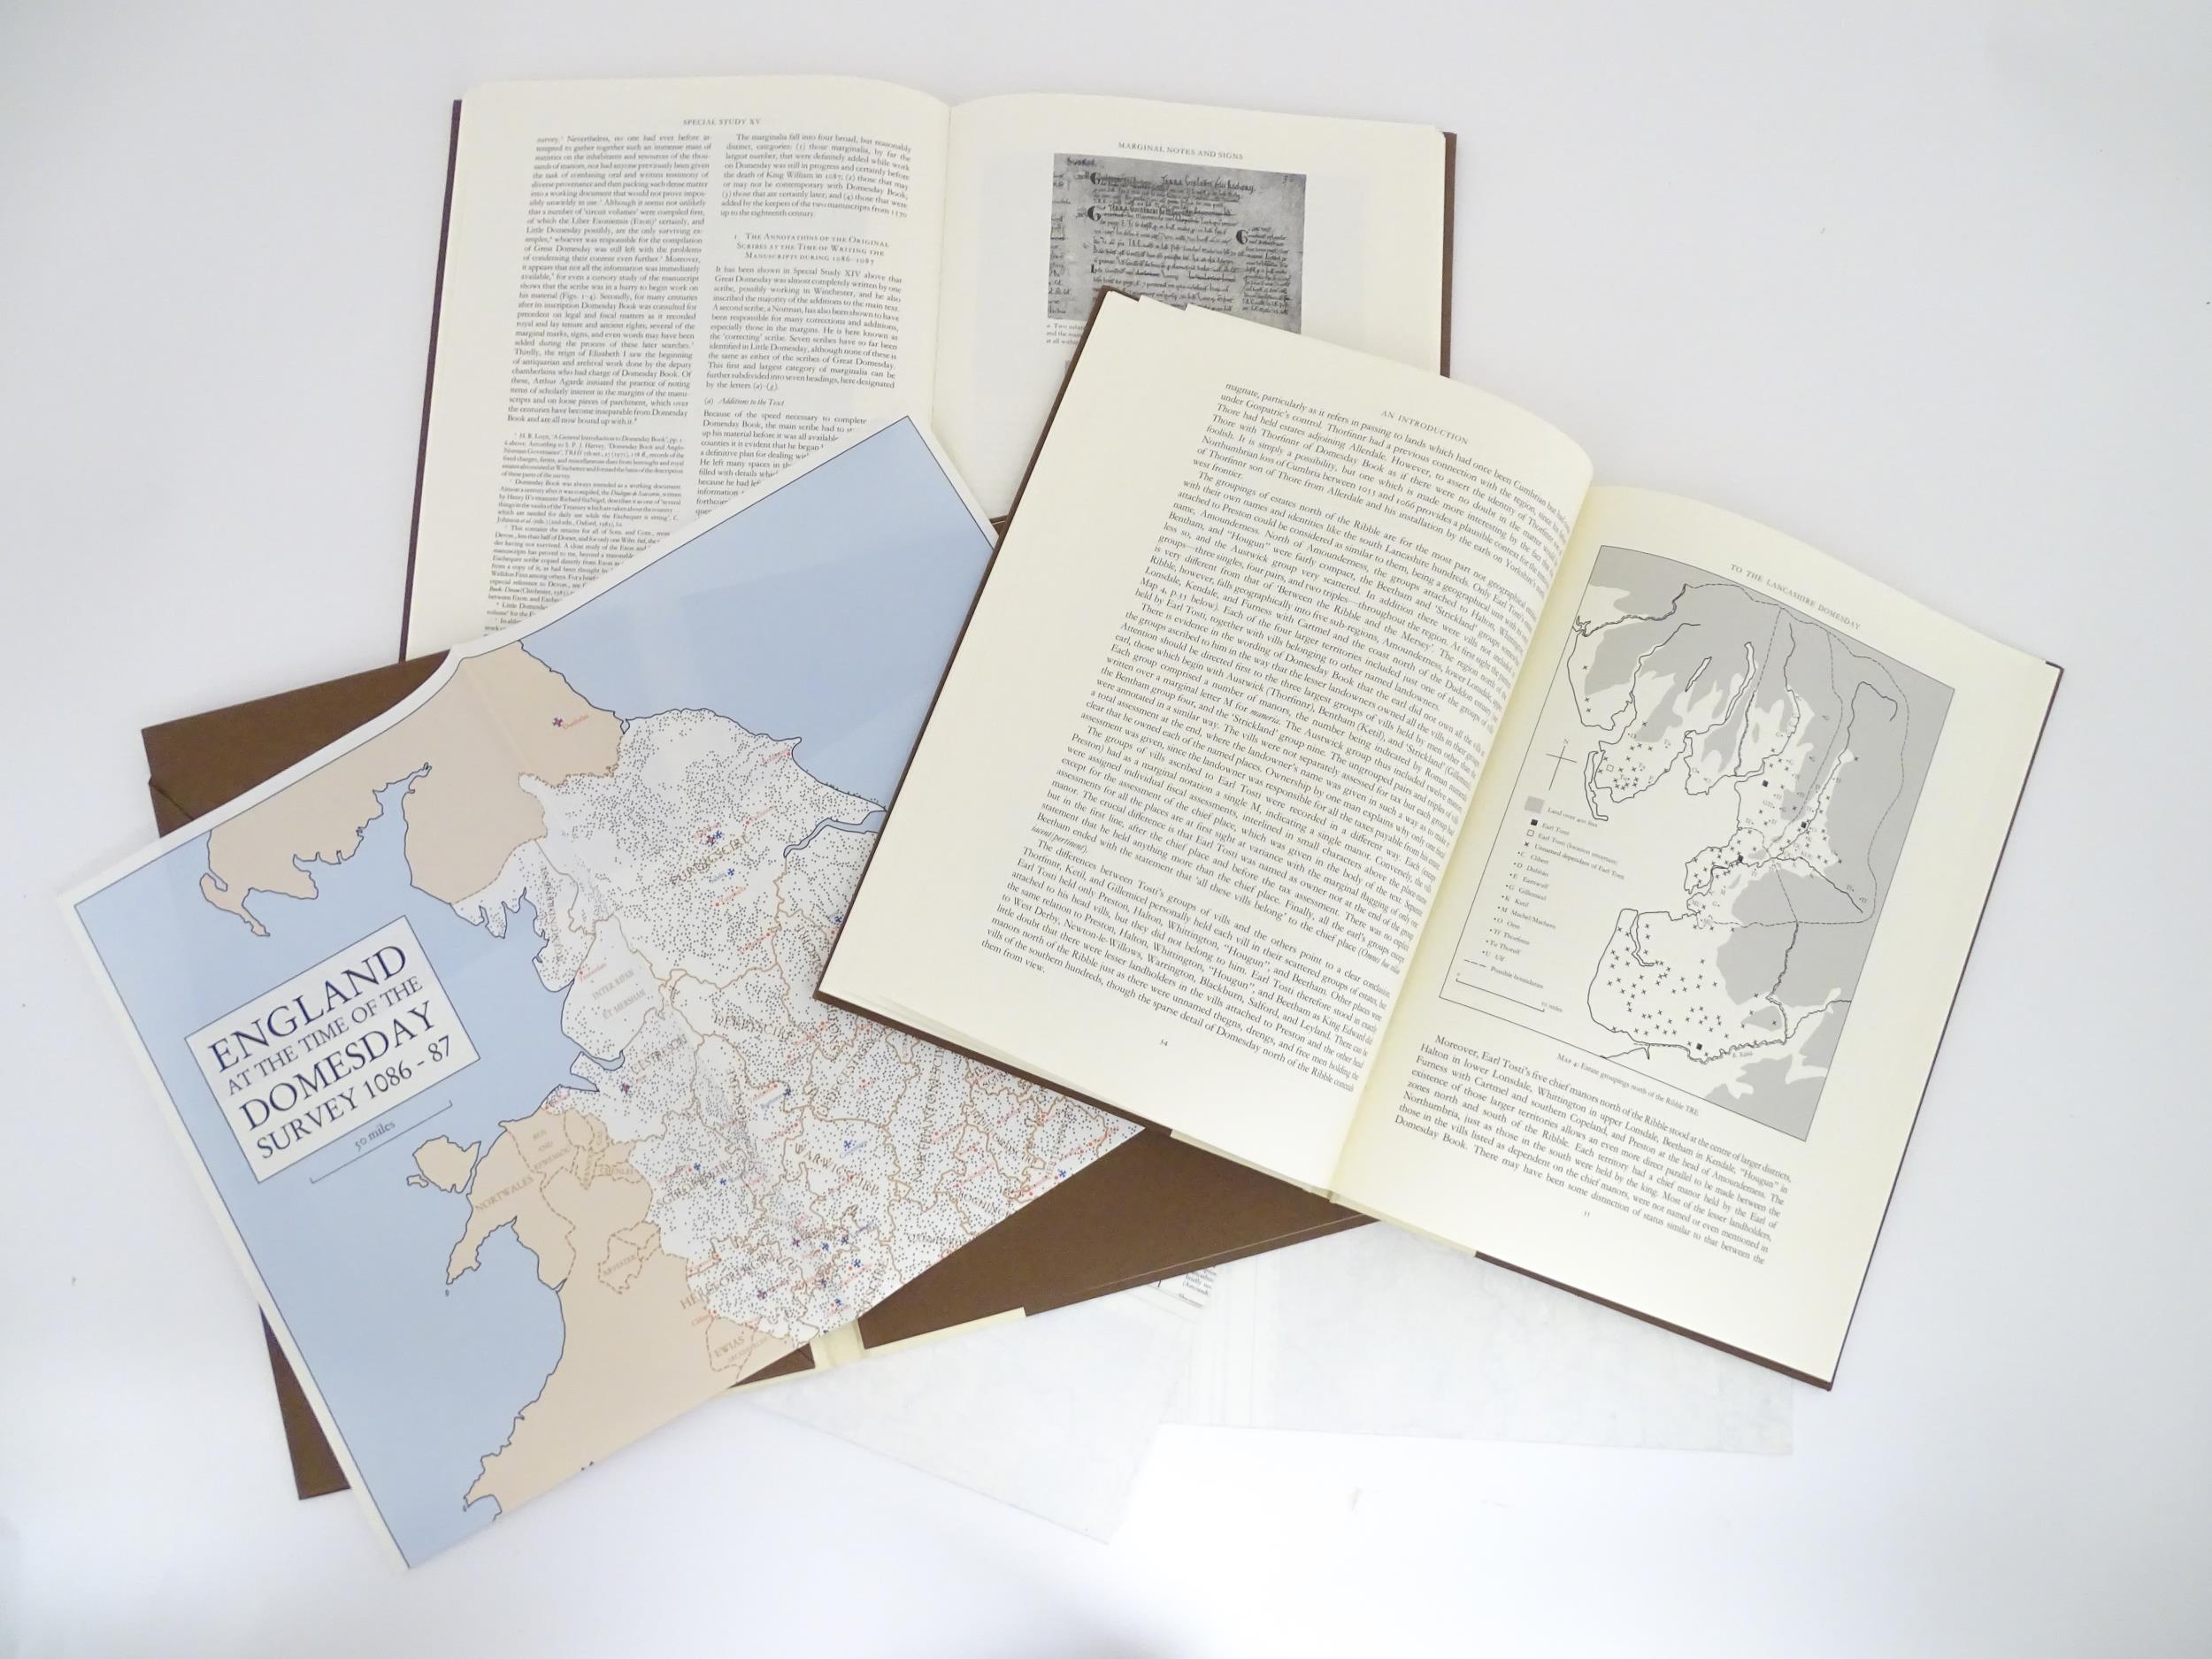 Books: The Lancashire Domesday, comprising Introduction & Translation, Studies, and Folios & Maps. - Image 11 of 15